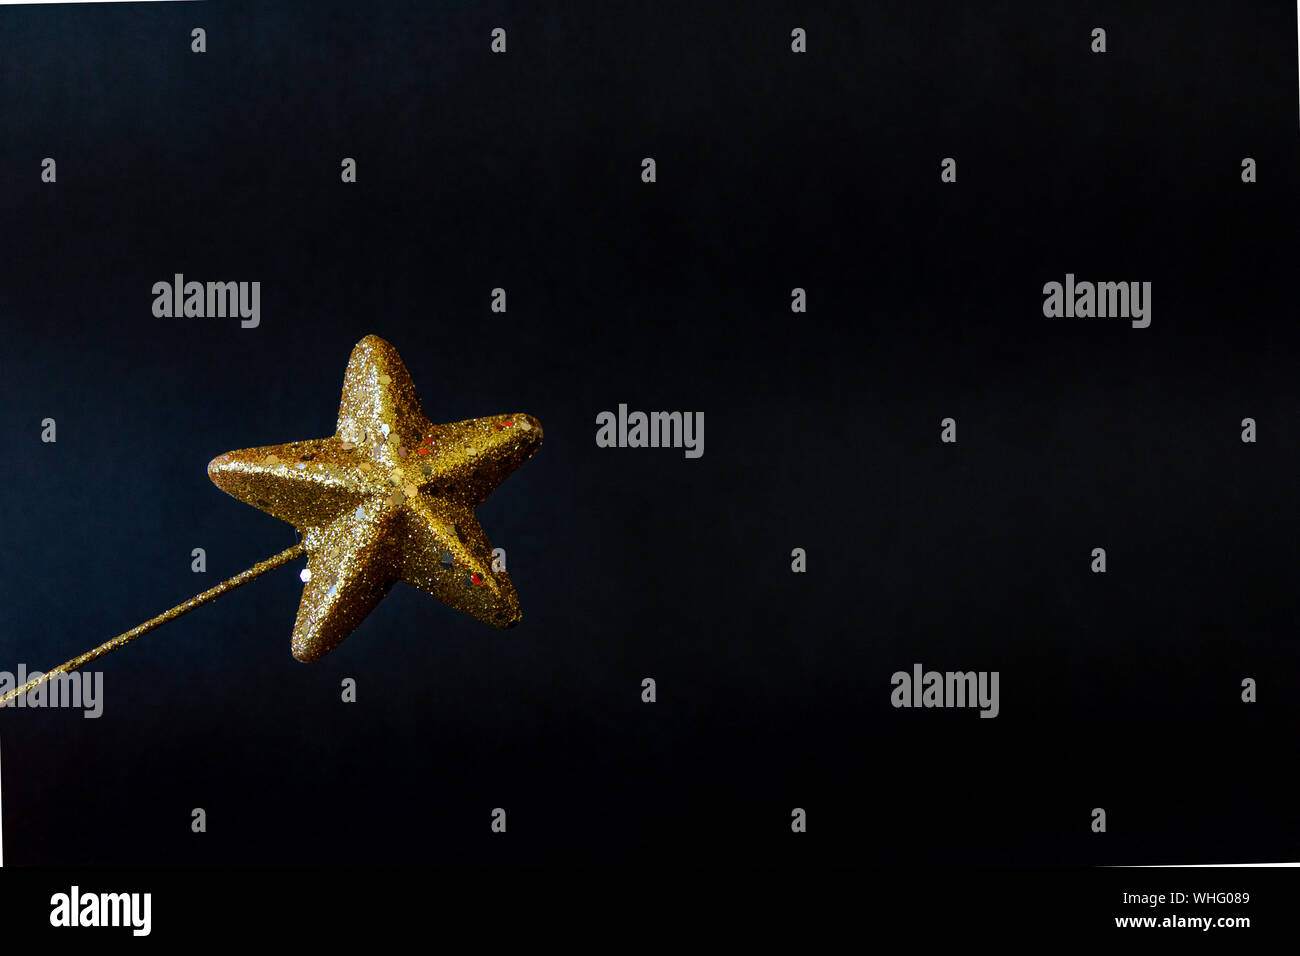 Golden star magiс wand isolated on black background Stock Photo